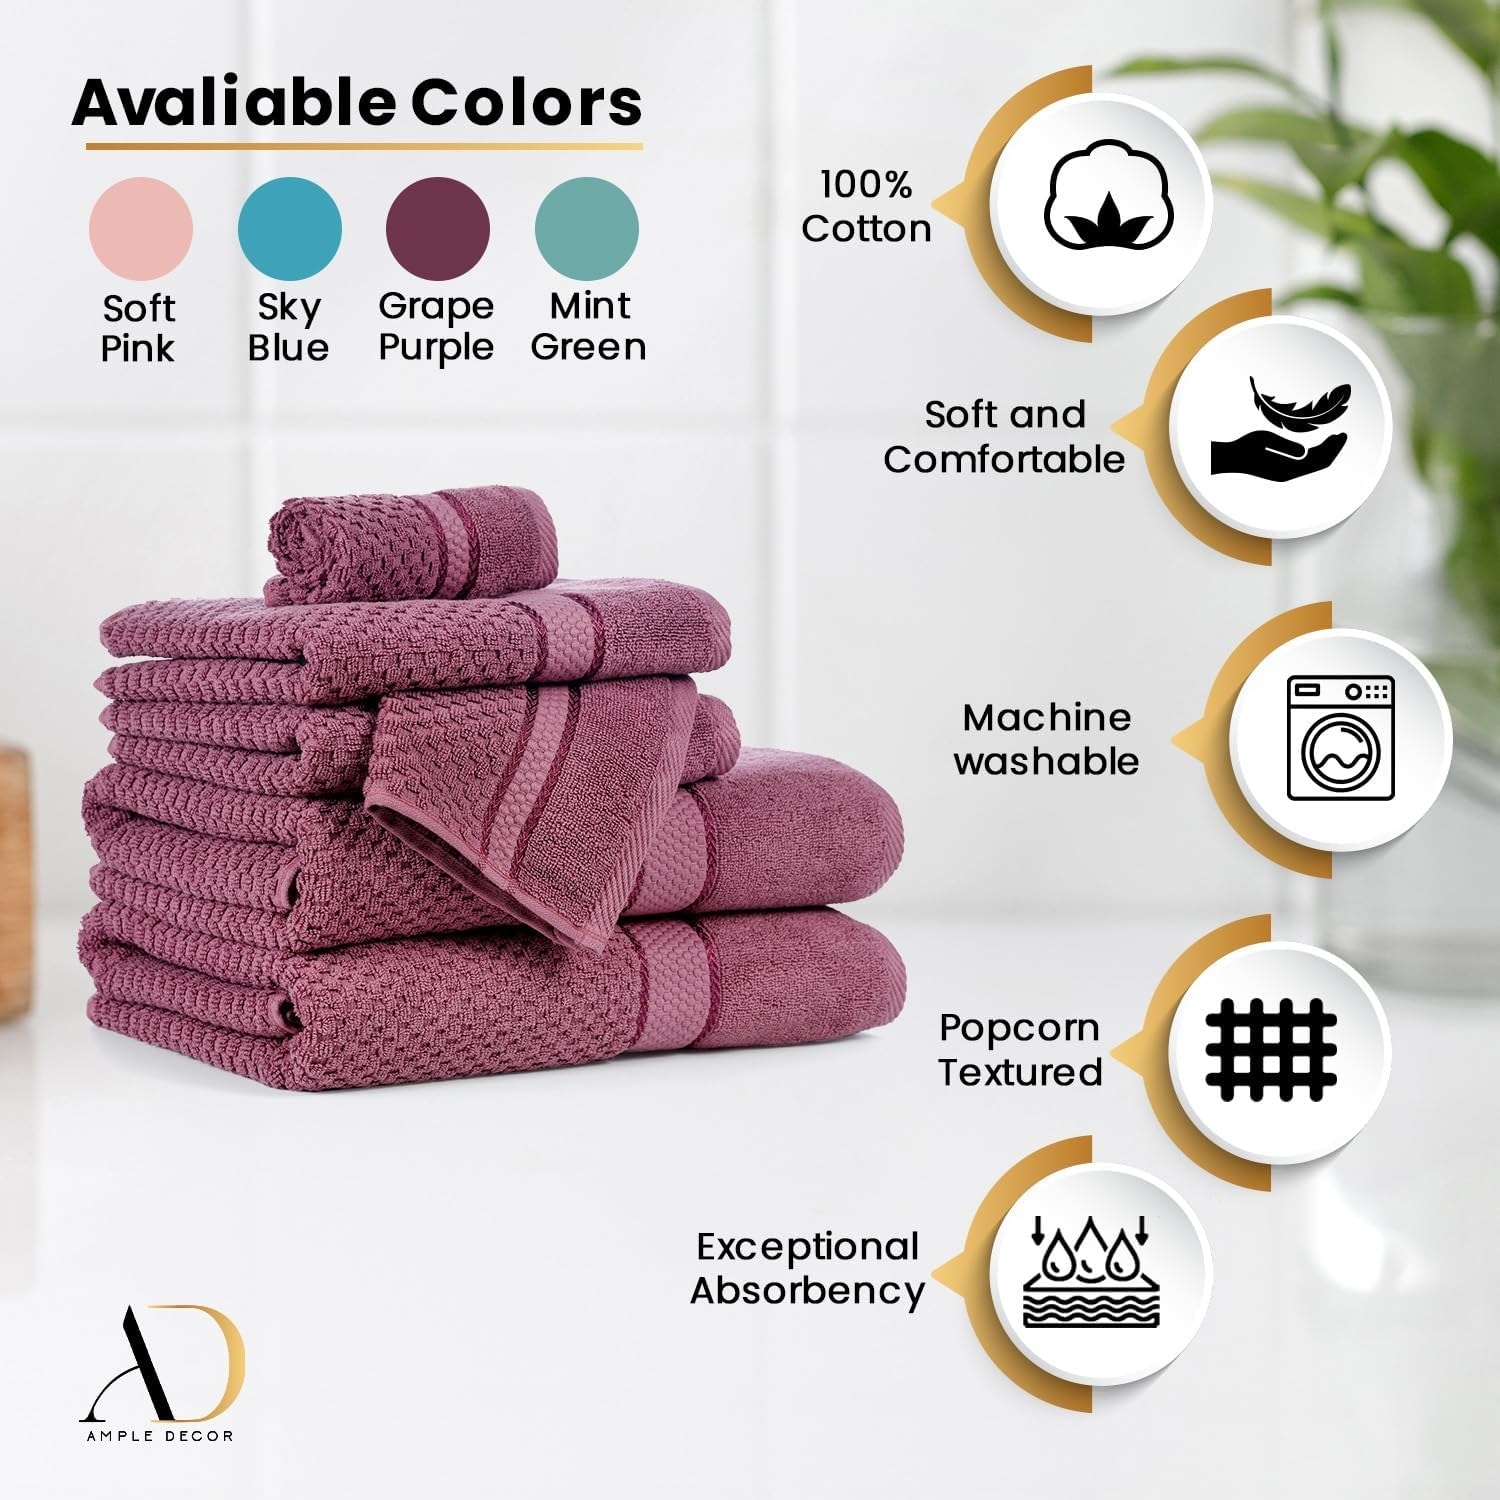 https://ak1.ostkcdn.com/images/products/is/images/direct/e37896421d1bbbaba10bc8160850e75f55cd7798/Cotton-Popcorn-Textured-6-Piece-Towel-Set-by-Ample-Decor.jpg